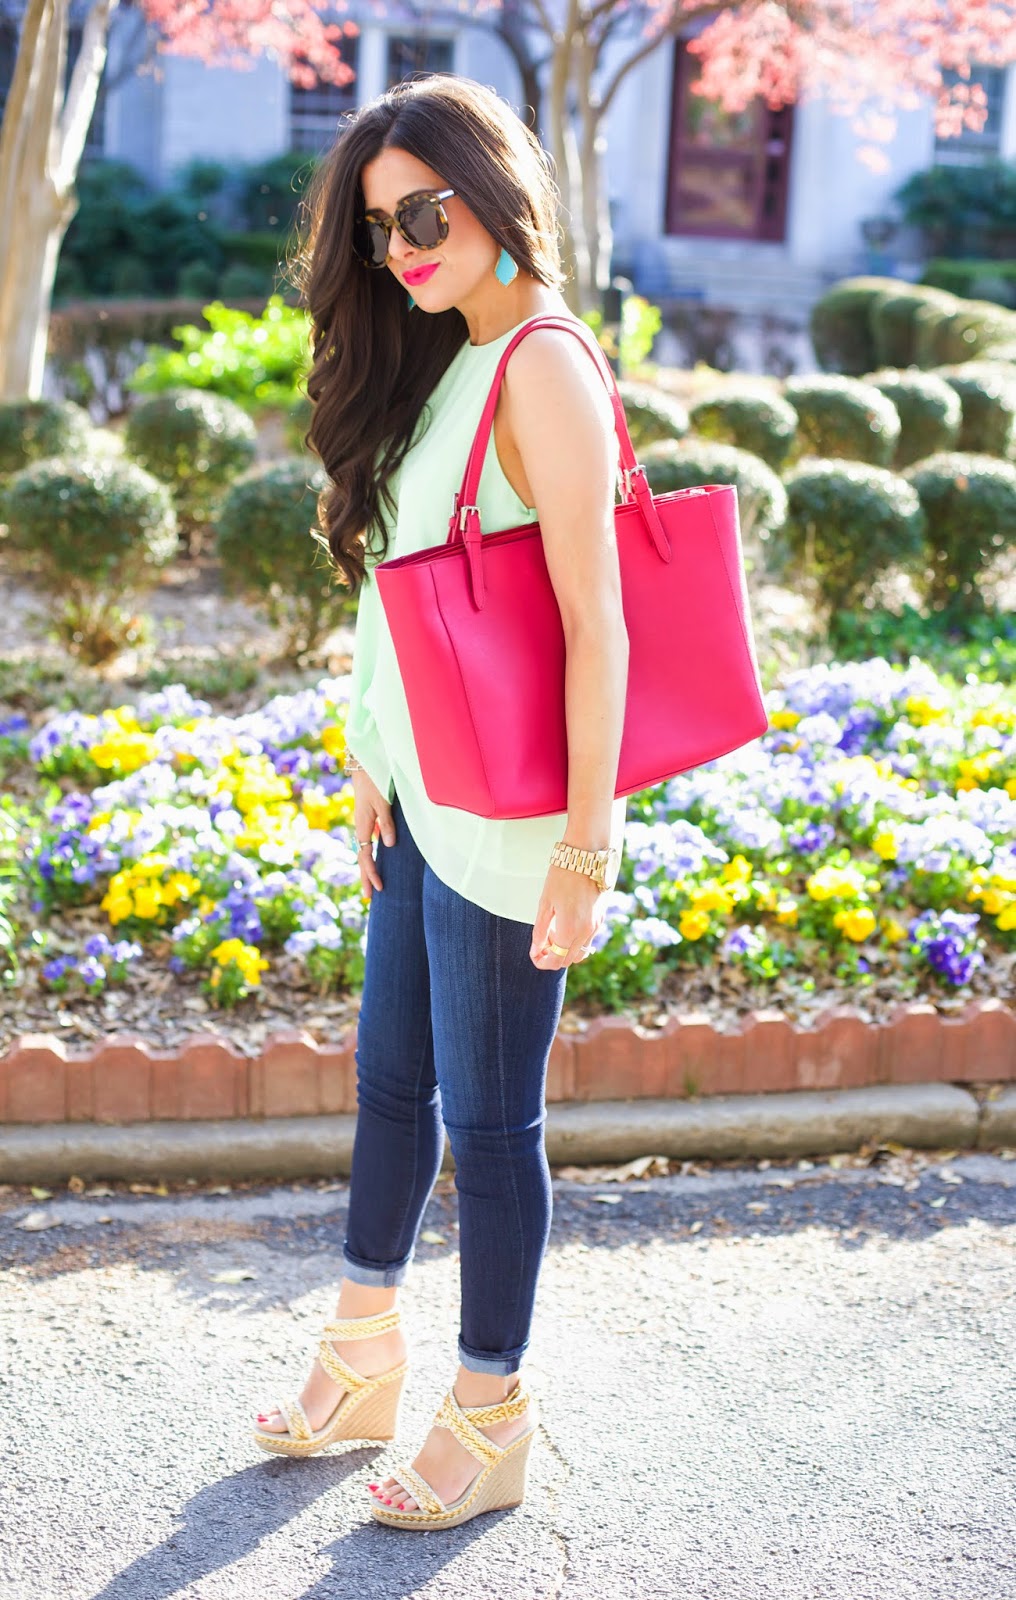 Bright Spring Closet Staples | The Sweetest Thing | Bloglovin’